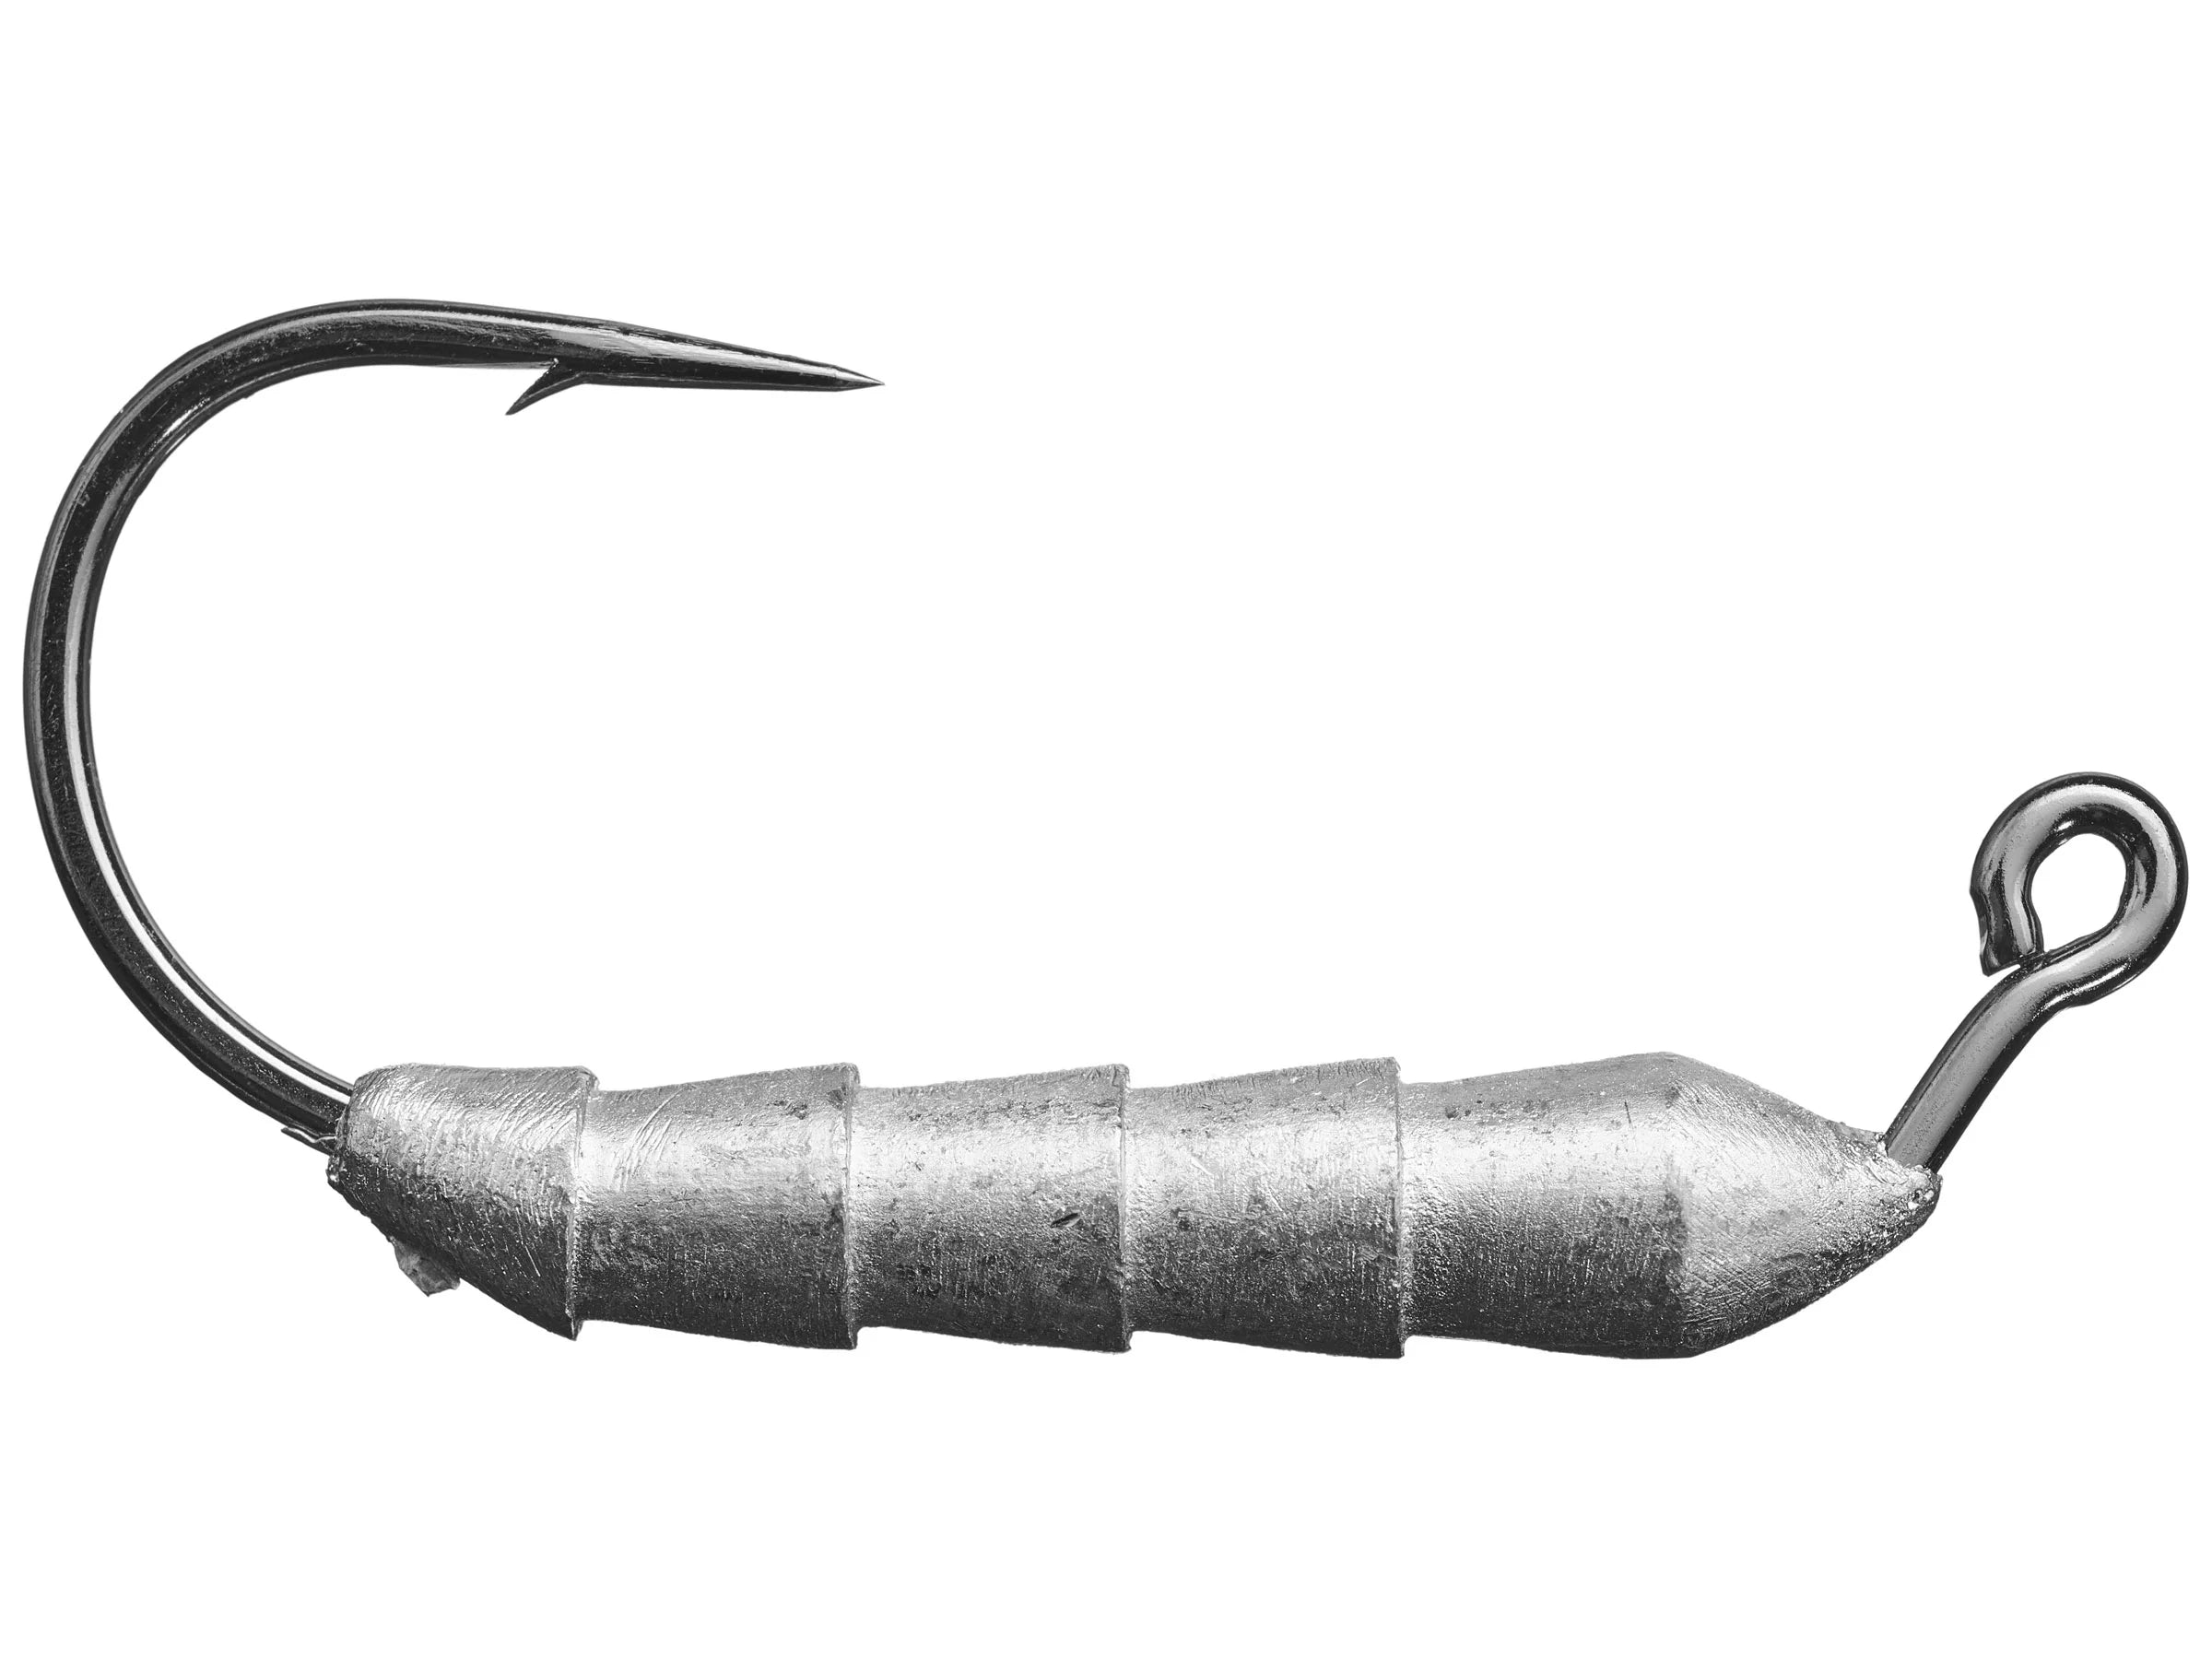 Dragon Keeper weighted swimbait hook 3pk